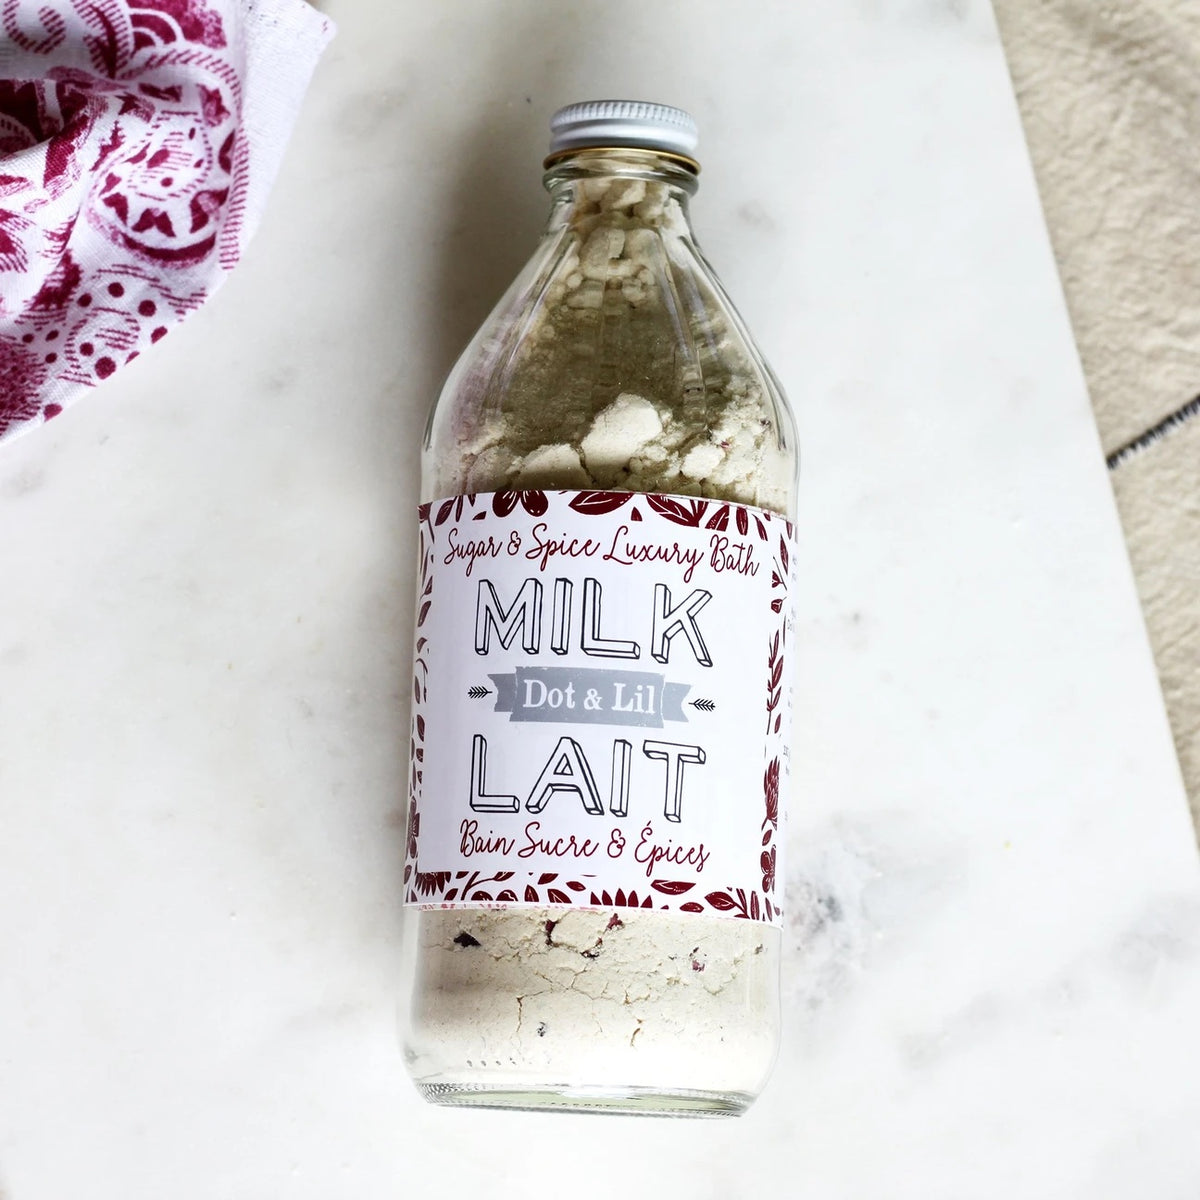 A clear glass bottle of Dot & Lil Sugar + Spice Milk Bath labeled "milk dot a lil" on a marble surface, with a decorative theme featuring red and white text and infused with moisturizing whole milk powder.